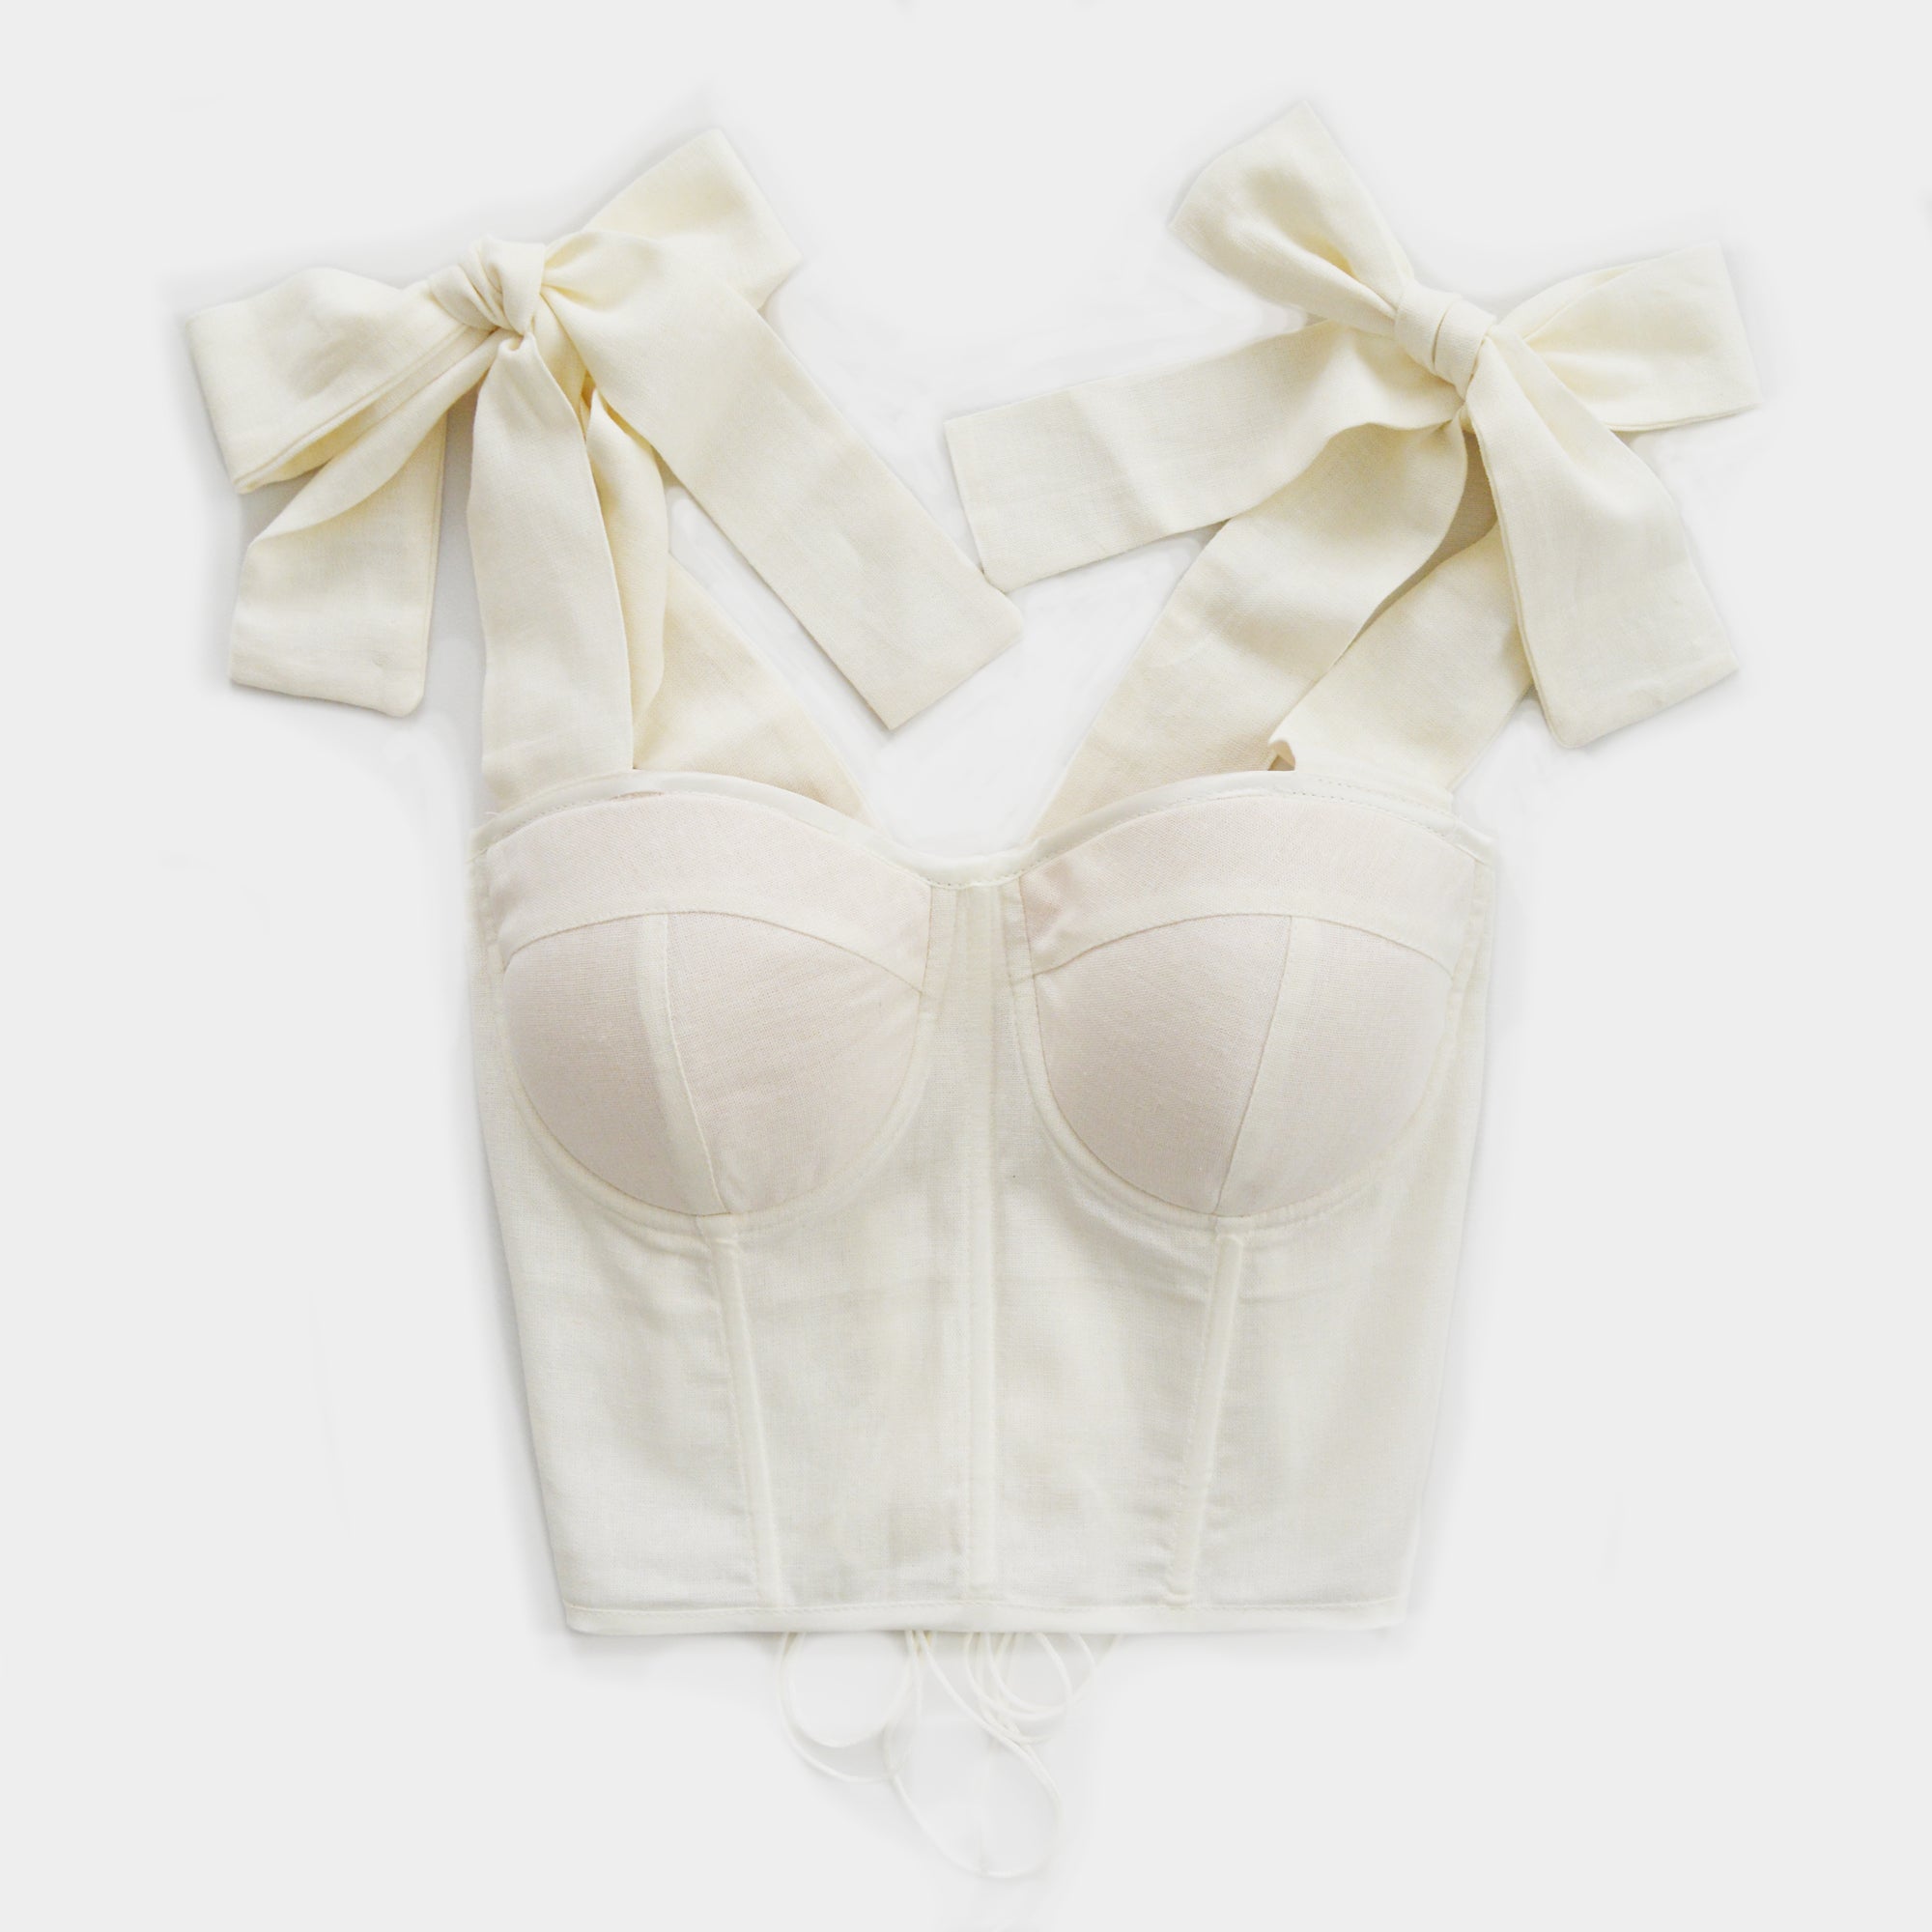 "LINEN WITH A BOW" CORSET